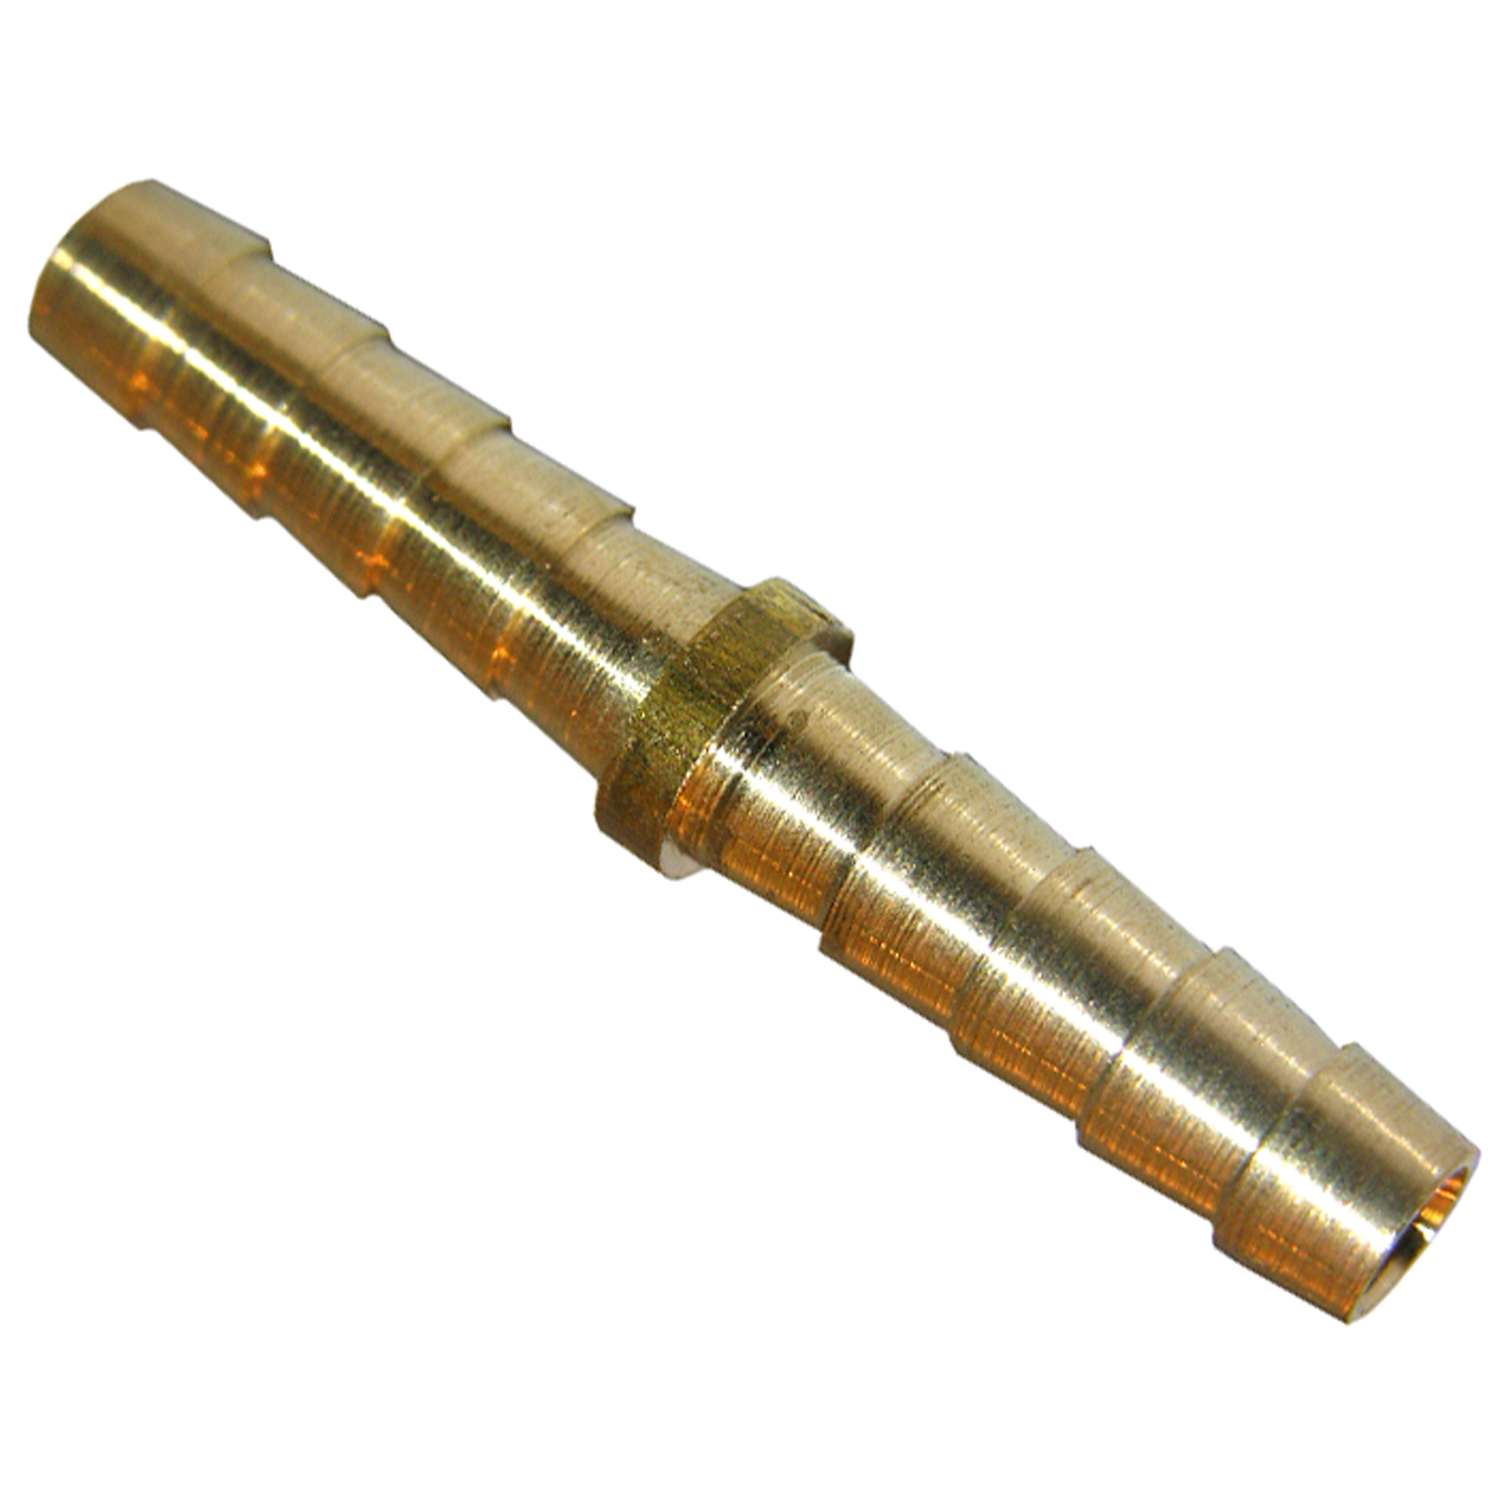 Lasco 17-7507 Coupling, 3/16 in, Barb, Brass